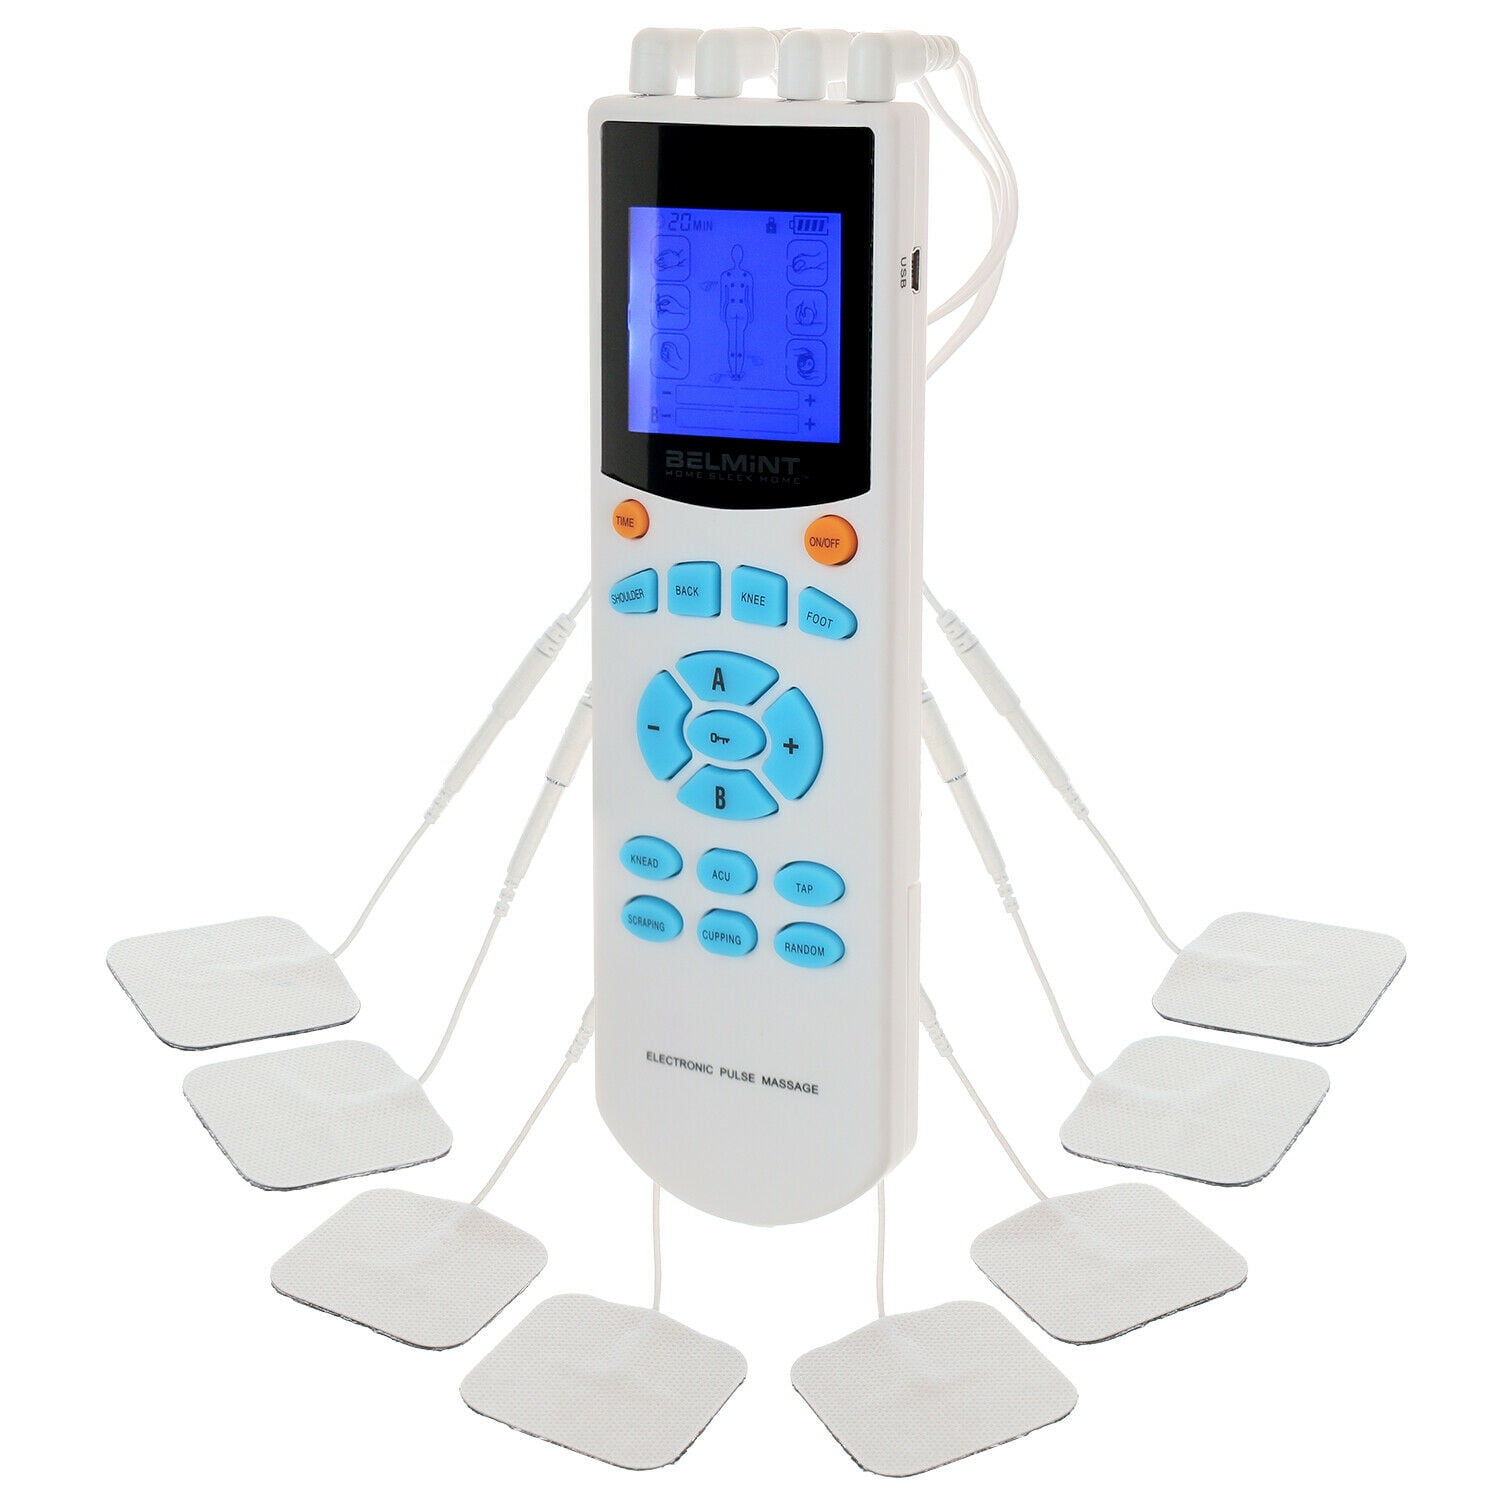 Wireless TENS Unit for Pain Relief, Portable and Rechargeable, 15 Modes  Electronic Muscle Stimulator…See more Wireless TENS Unit for Pain Relief